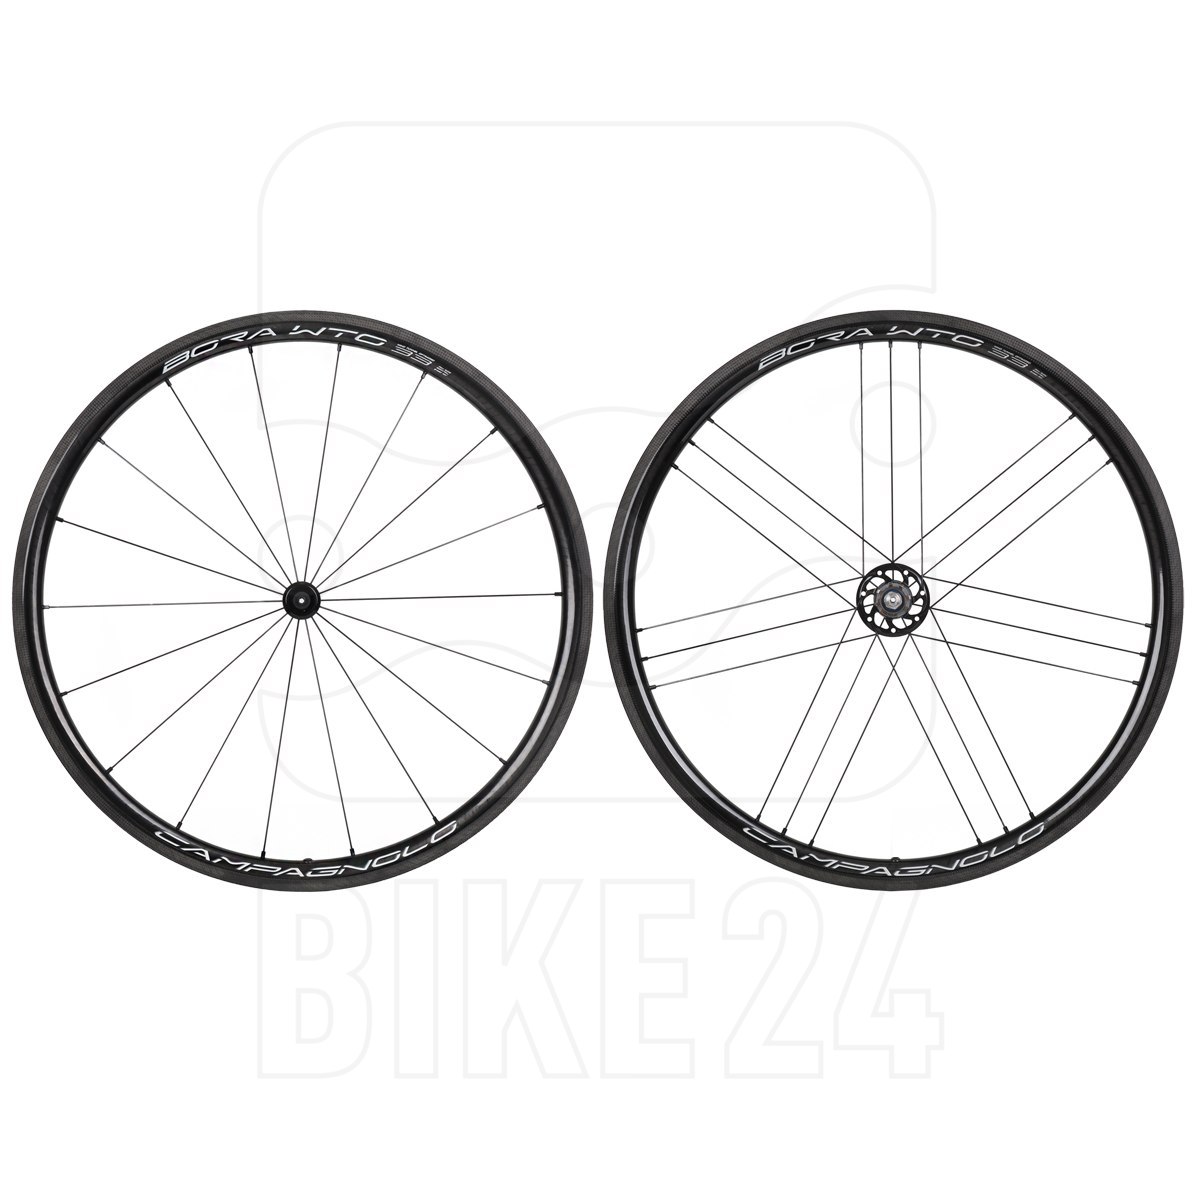 Picture of Campagnolo Bora WTO 33 - 28 Inch Wheelset - Carbon - Tubeless/Clincher - 2-Way Fit - Campagnolo ED - QR - Bright